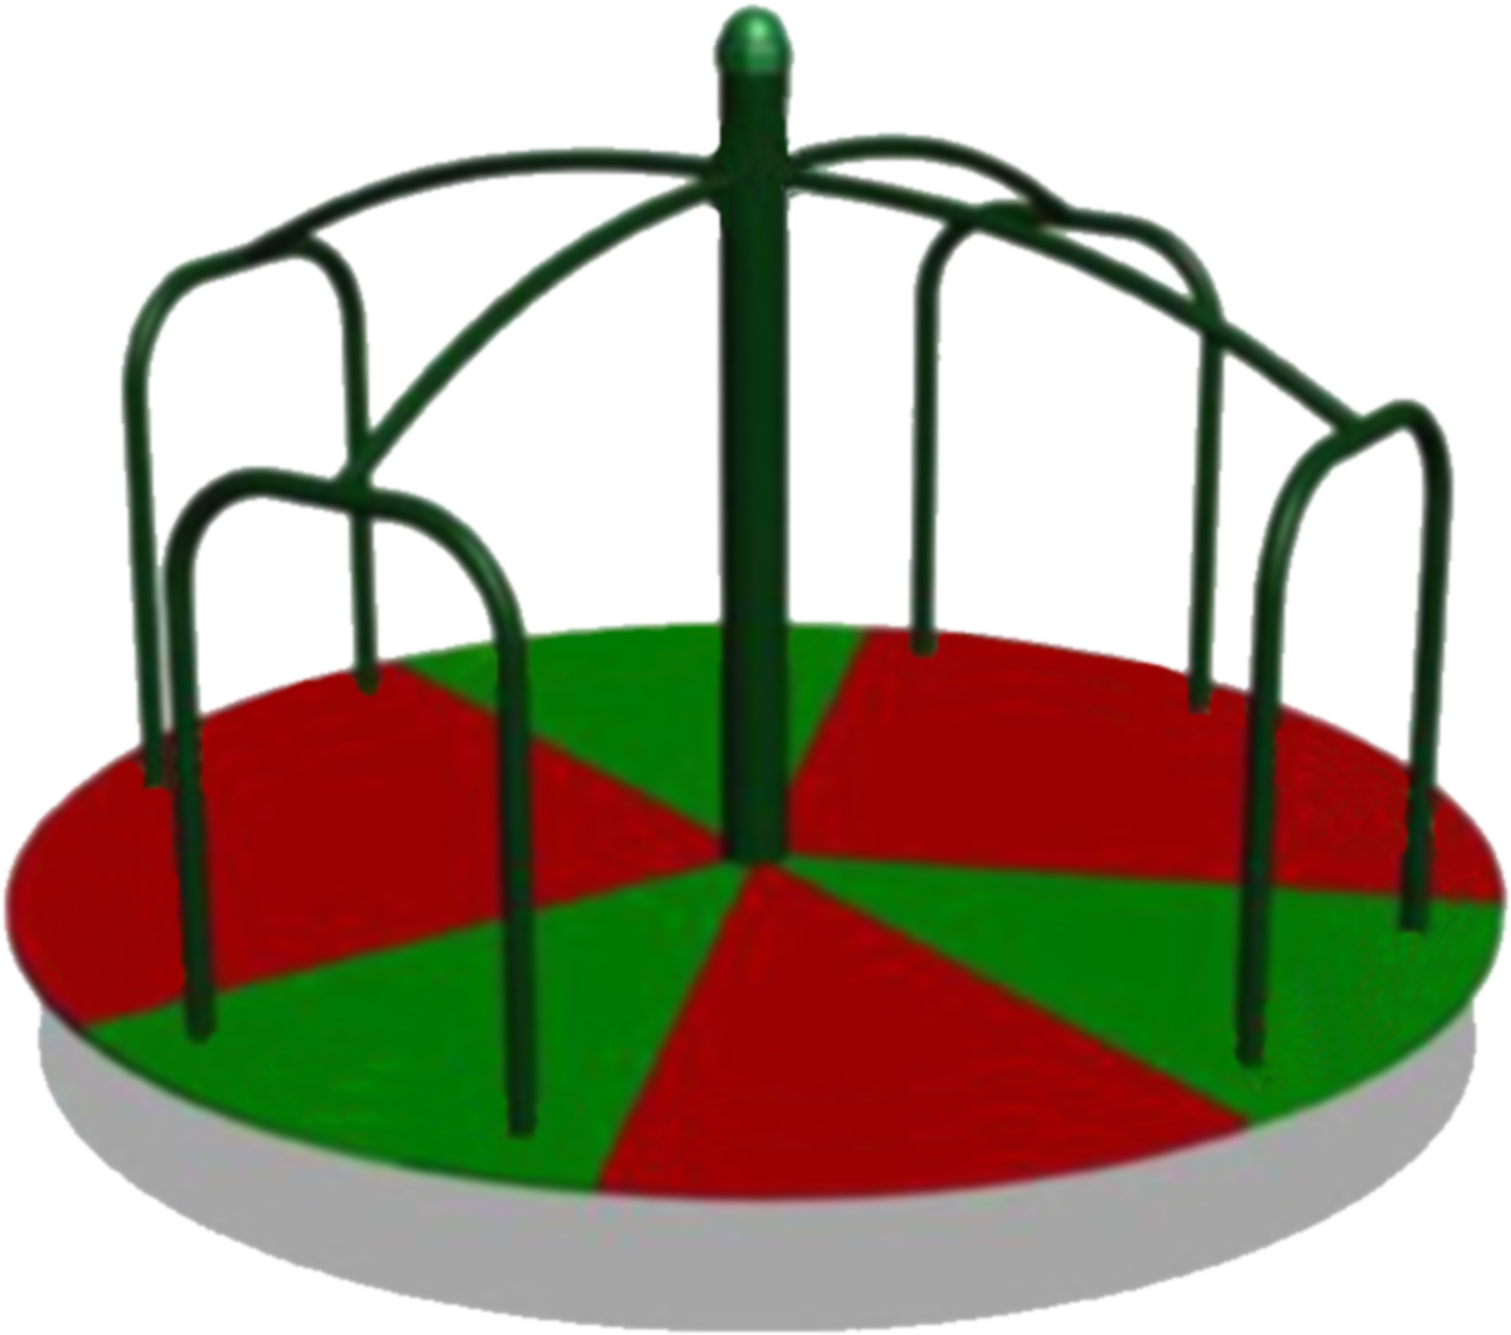 A Merry Go Round With A Red And Green Circle